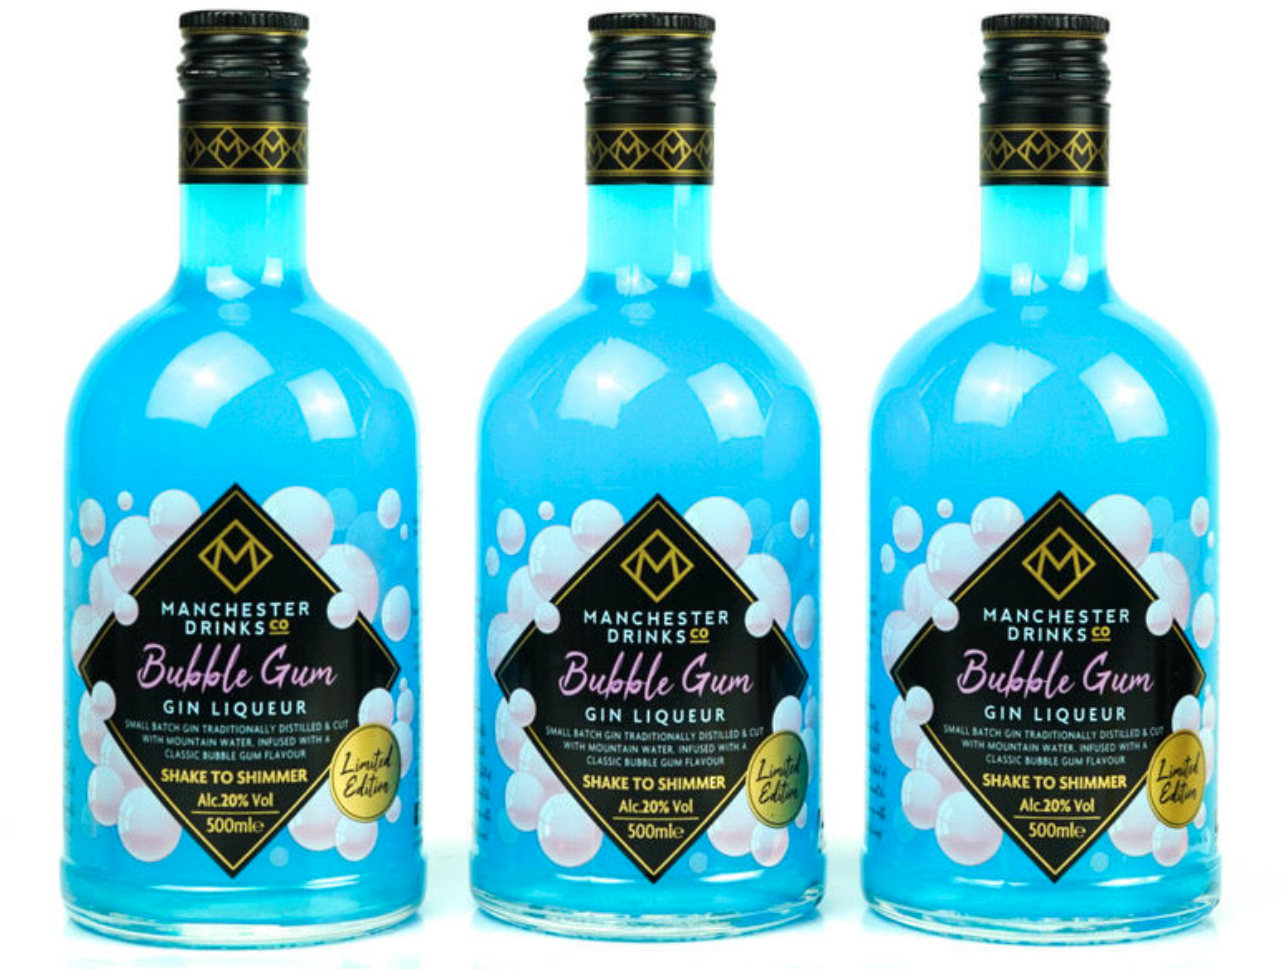 People are raving about this new limited edition Bubble Gum Gin Liqueur at Home Bargains, The Manc